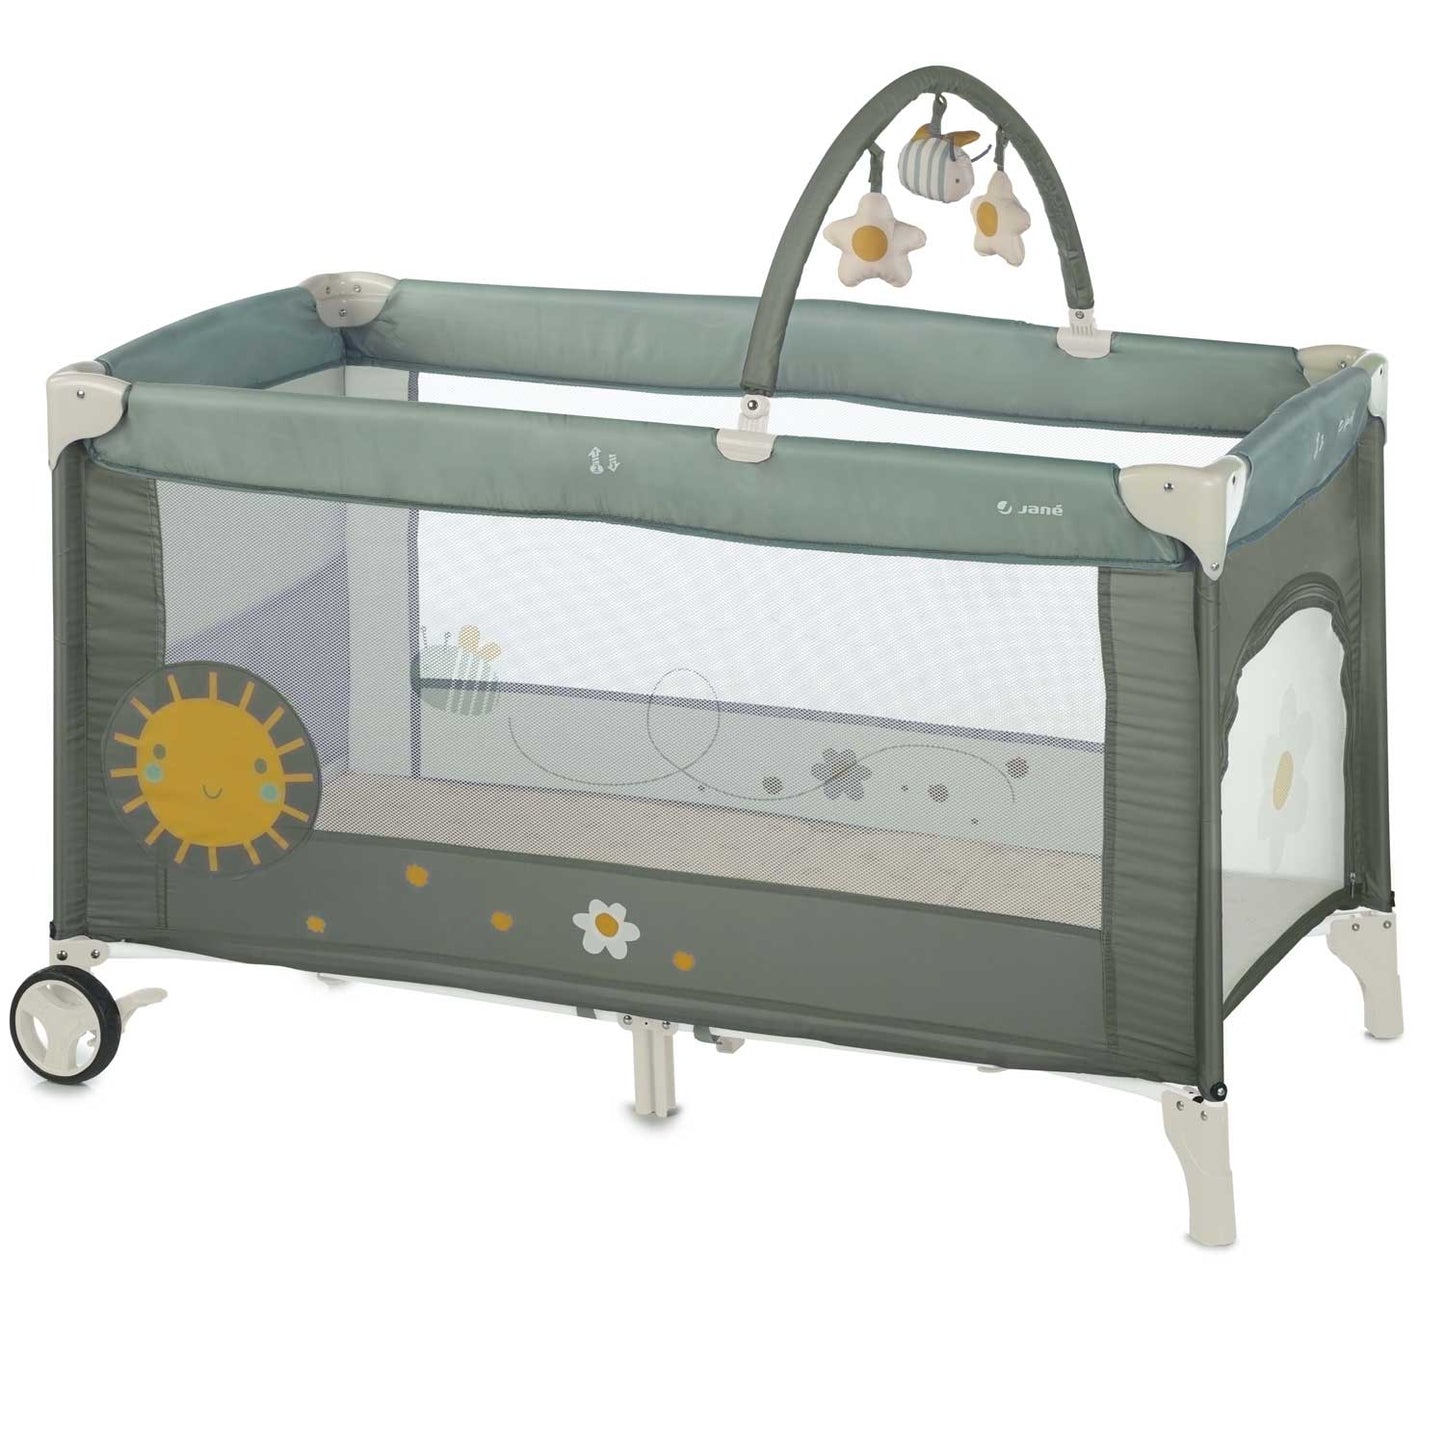 Janè - Travel Cot With One Level Games